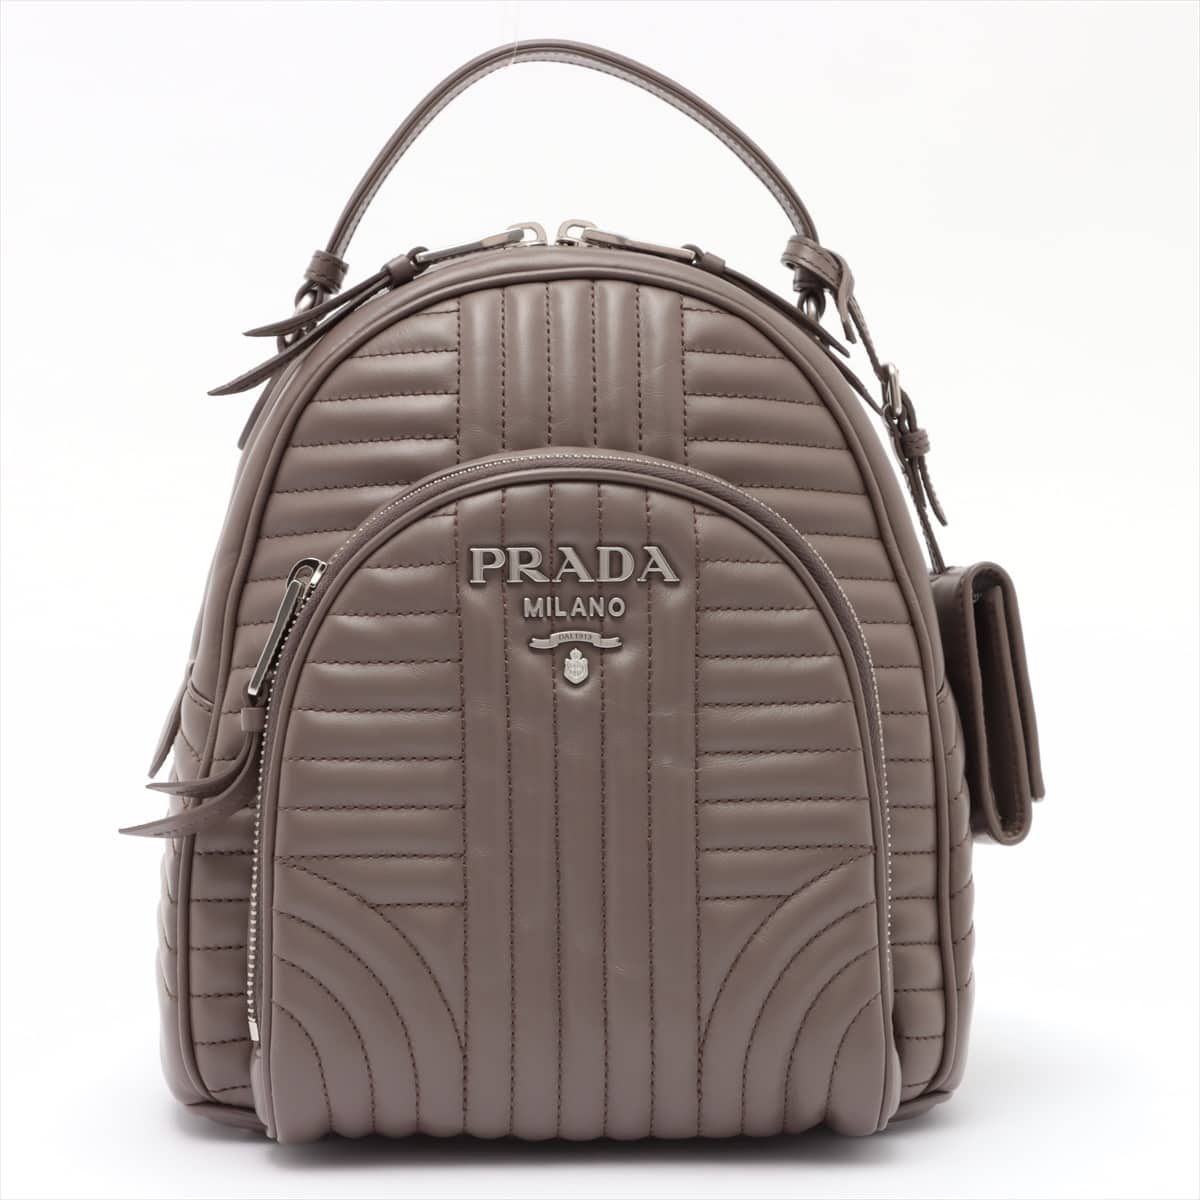 Prada Leather Backpack Grey 1BZ030 open papers